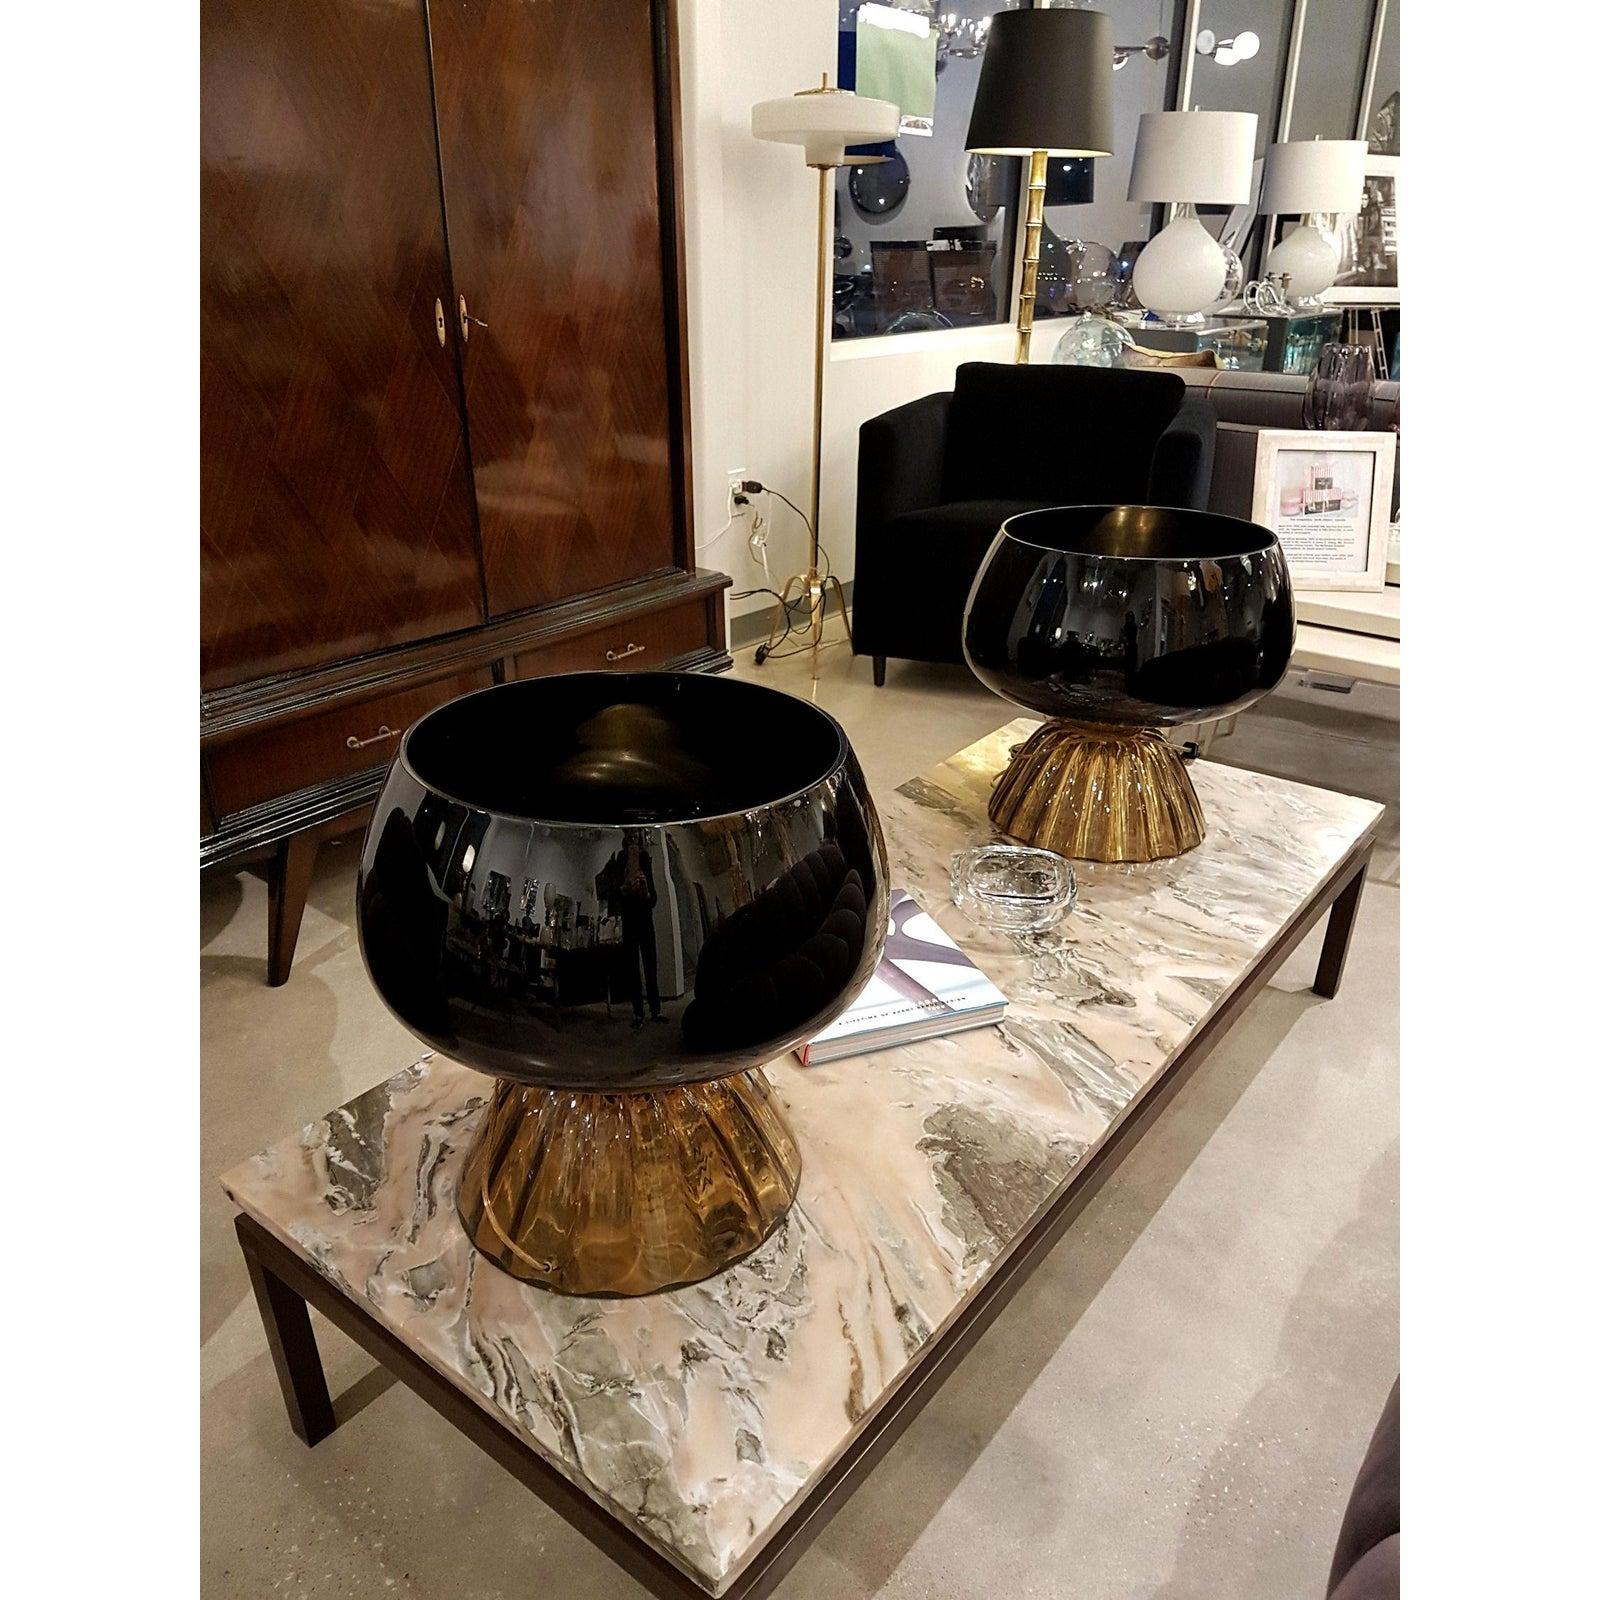 Pair of large Mid-Century Modern Murano glass table lamps with black almost opaque tops and brown transparent bases.
Attributed to Cenedese, Italy, late 1960s
The pair of vintage table lamps have brass fittings.
When lit, a halo of light comes